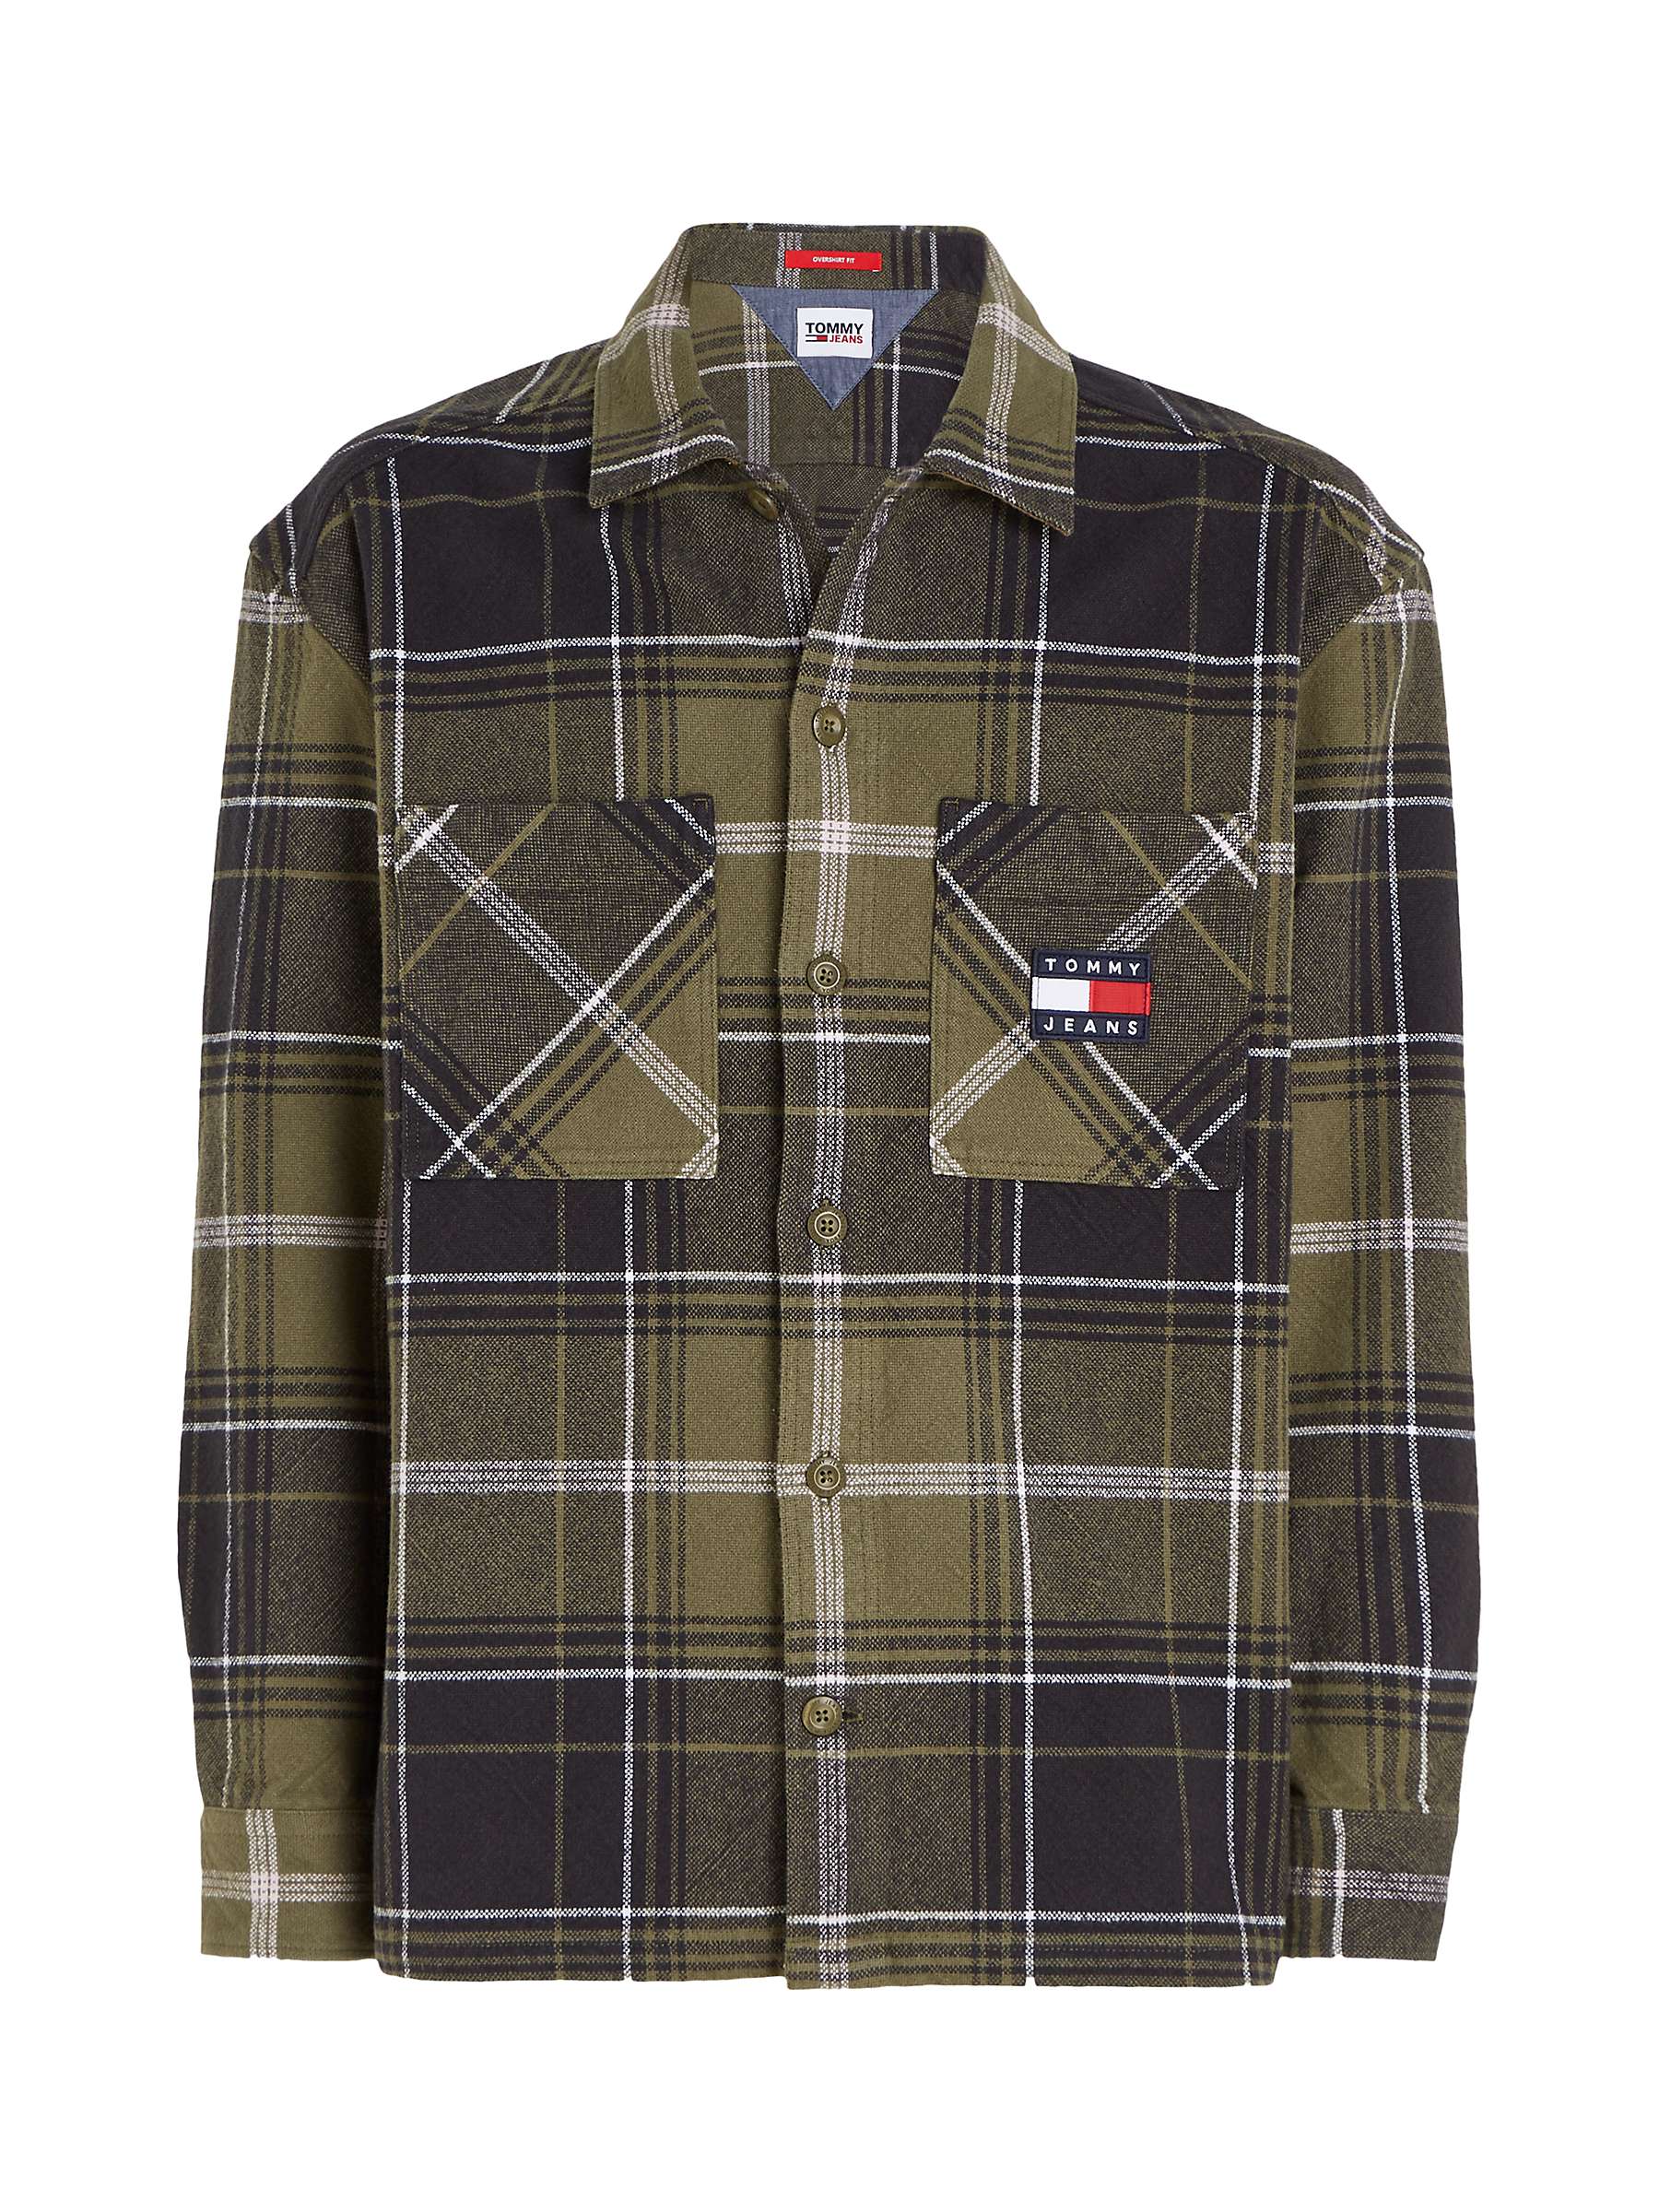 Tommy Jeans Check Overshirt, Olive Green Check at John Lewis & Partners